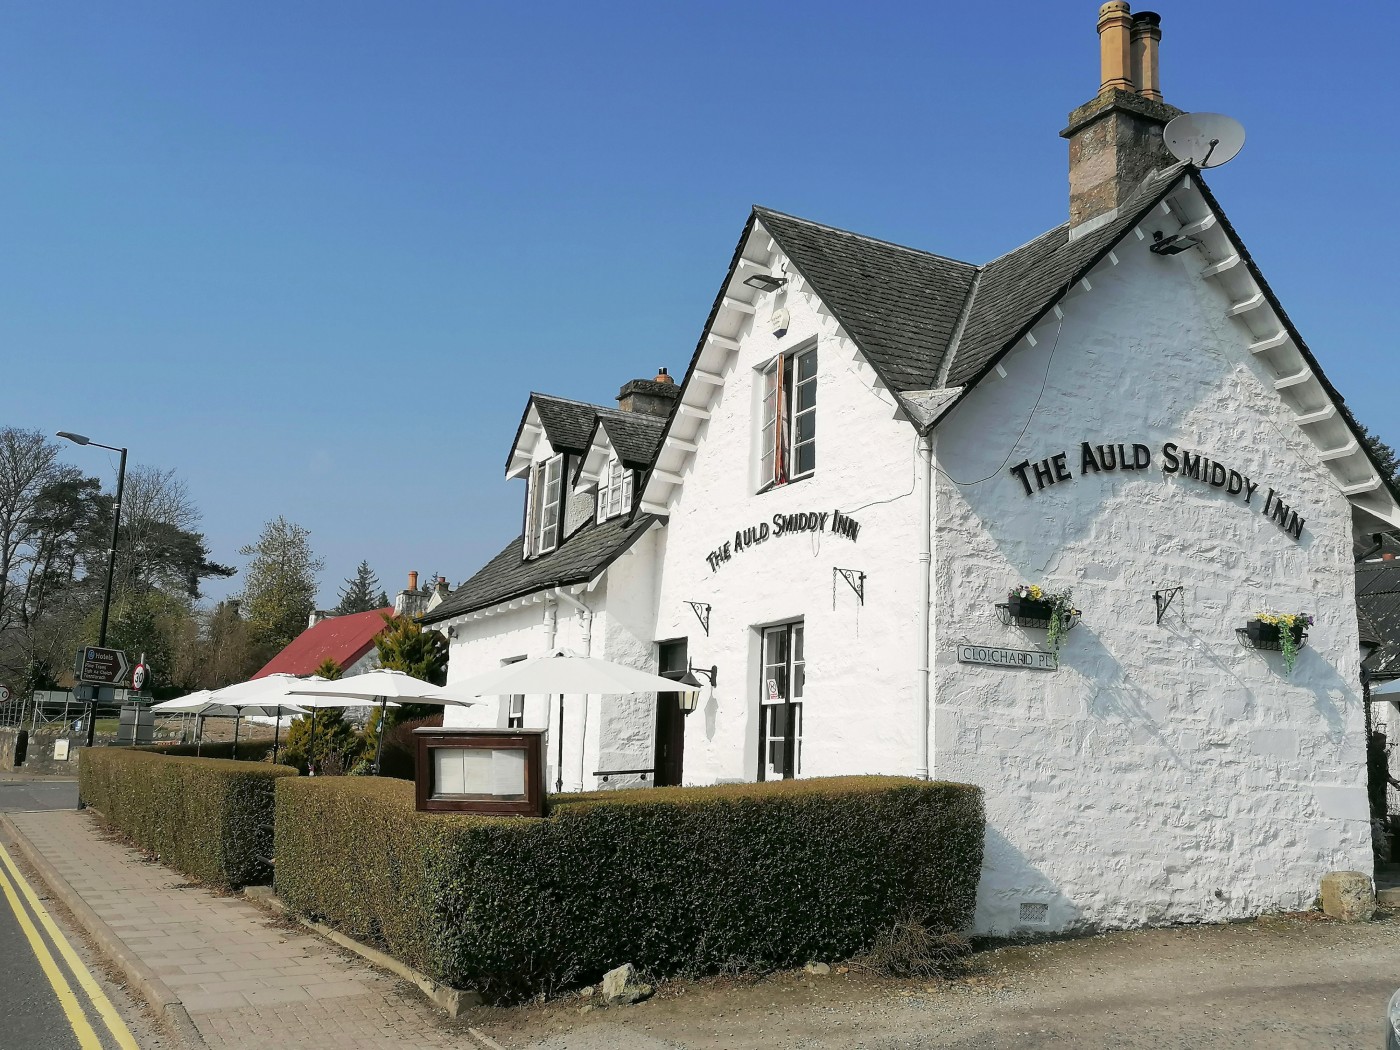 The Auld Smiddy Inn - Pitlochry